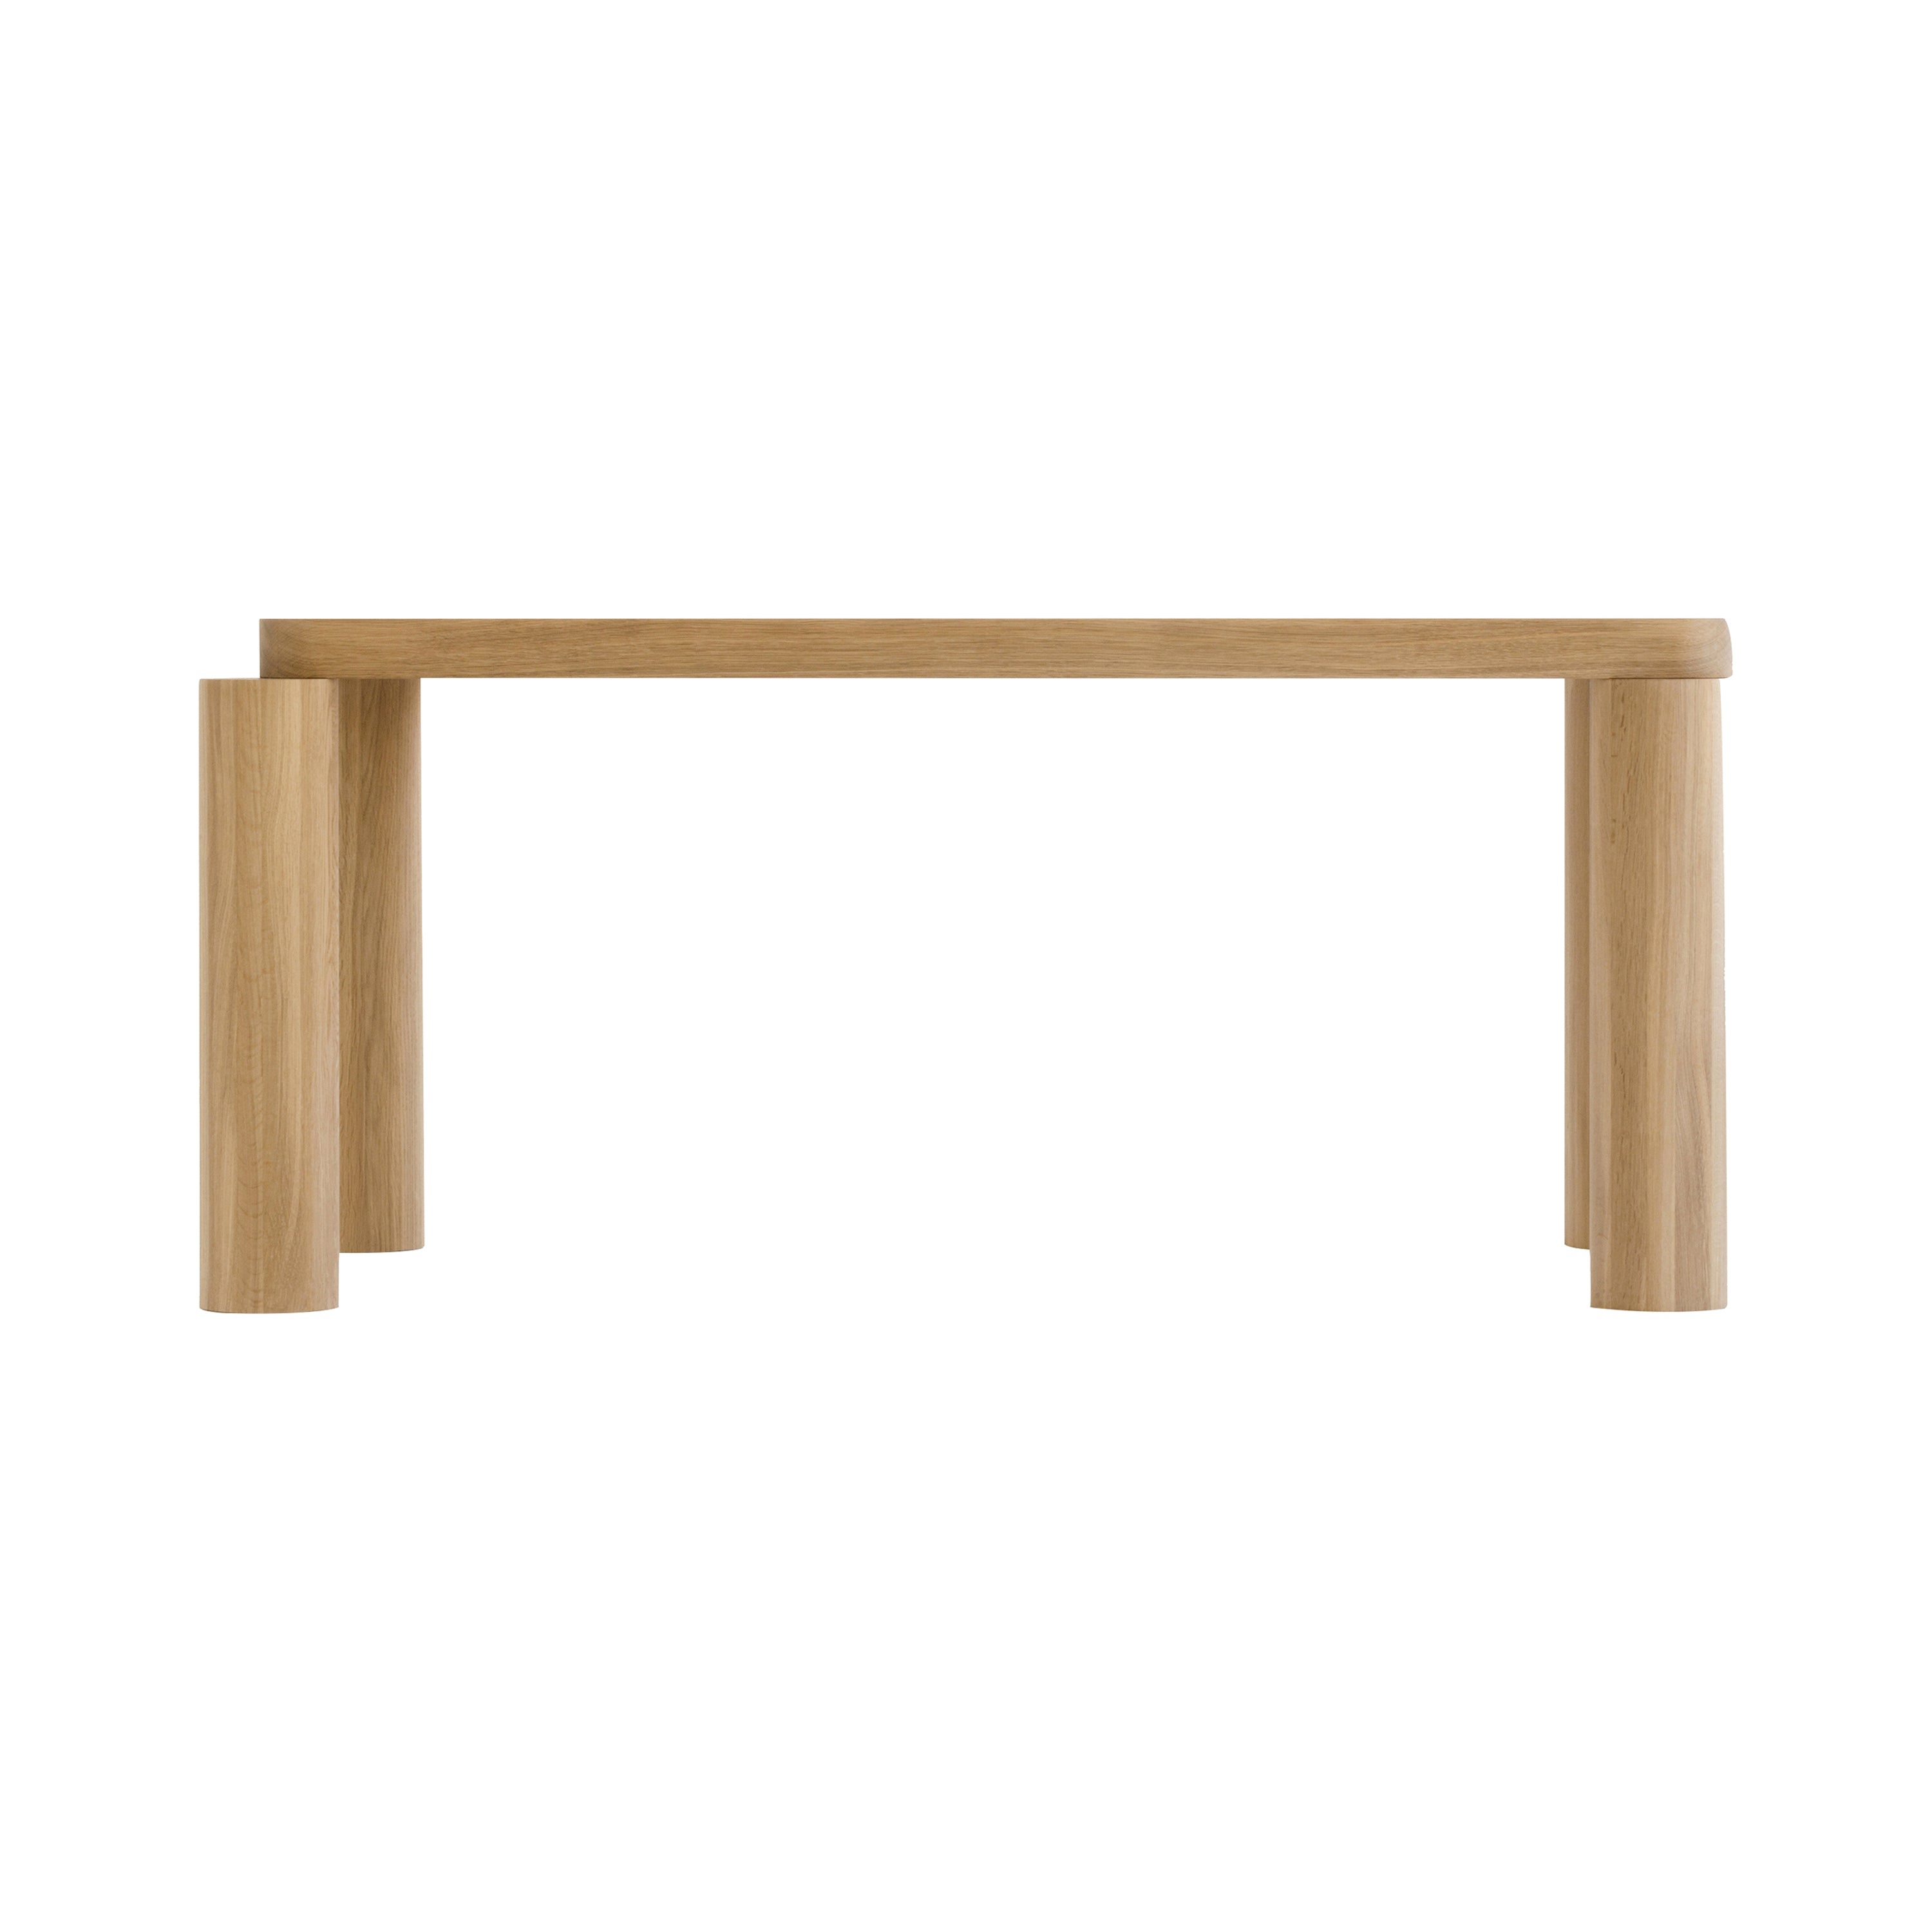 Offset Dining Table: 63